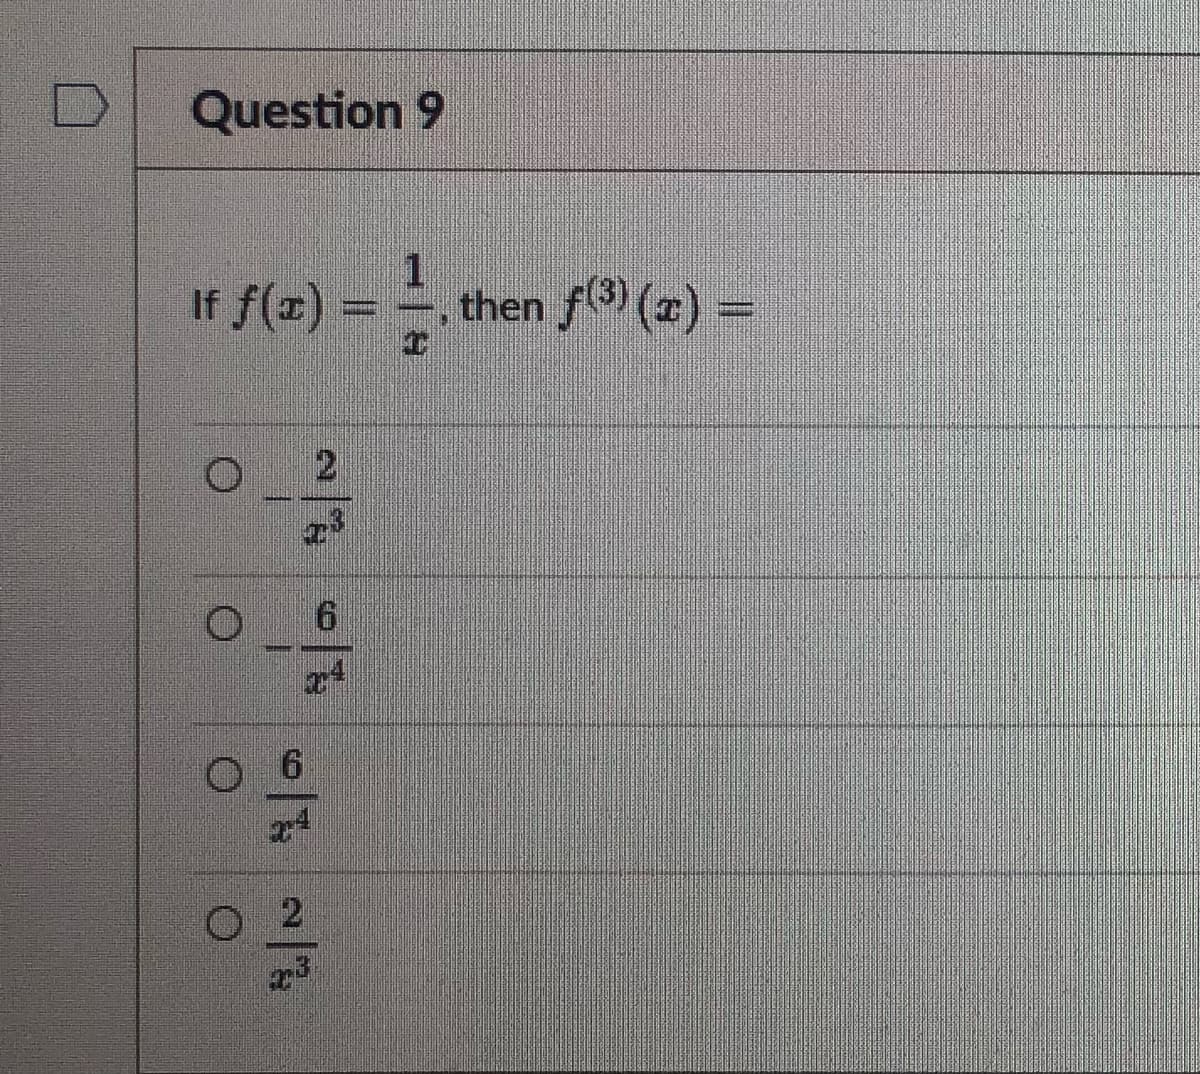 Question 9
1
If f(x) =
2
---/13
73
6
O
24
O
~
2/3/33
000
then f(³)(x) =